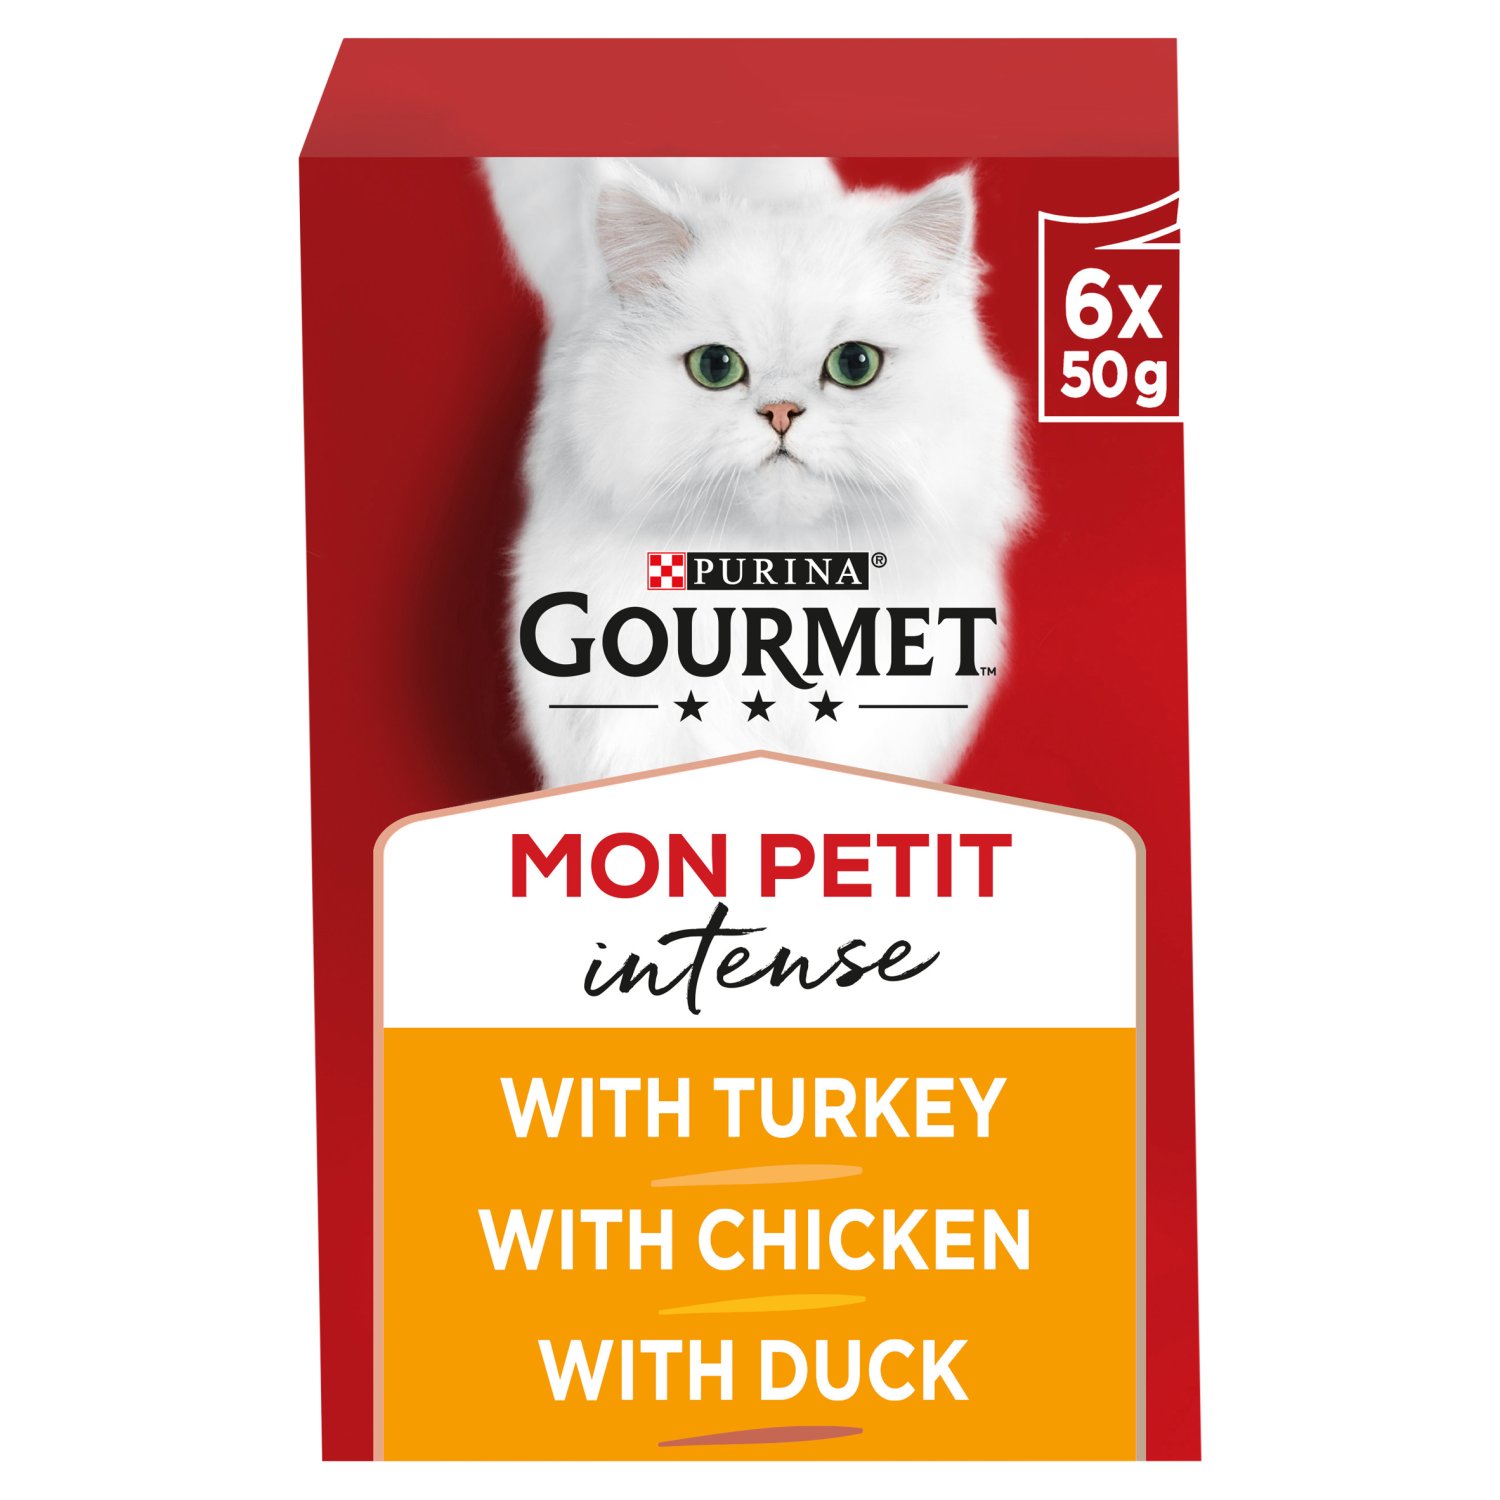 Gourmet Mon Petit Poultry Variety Cat Food 6 Pack (300 g)